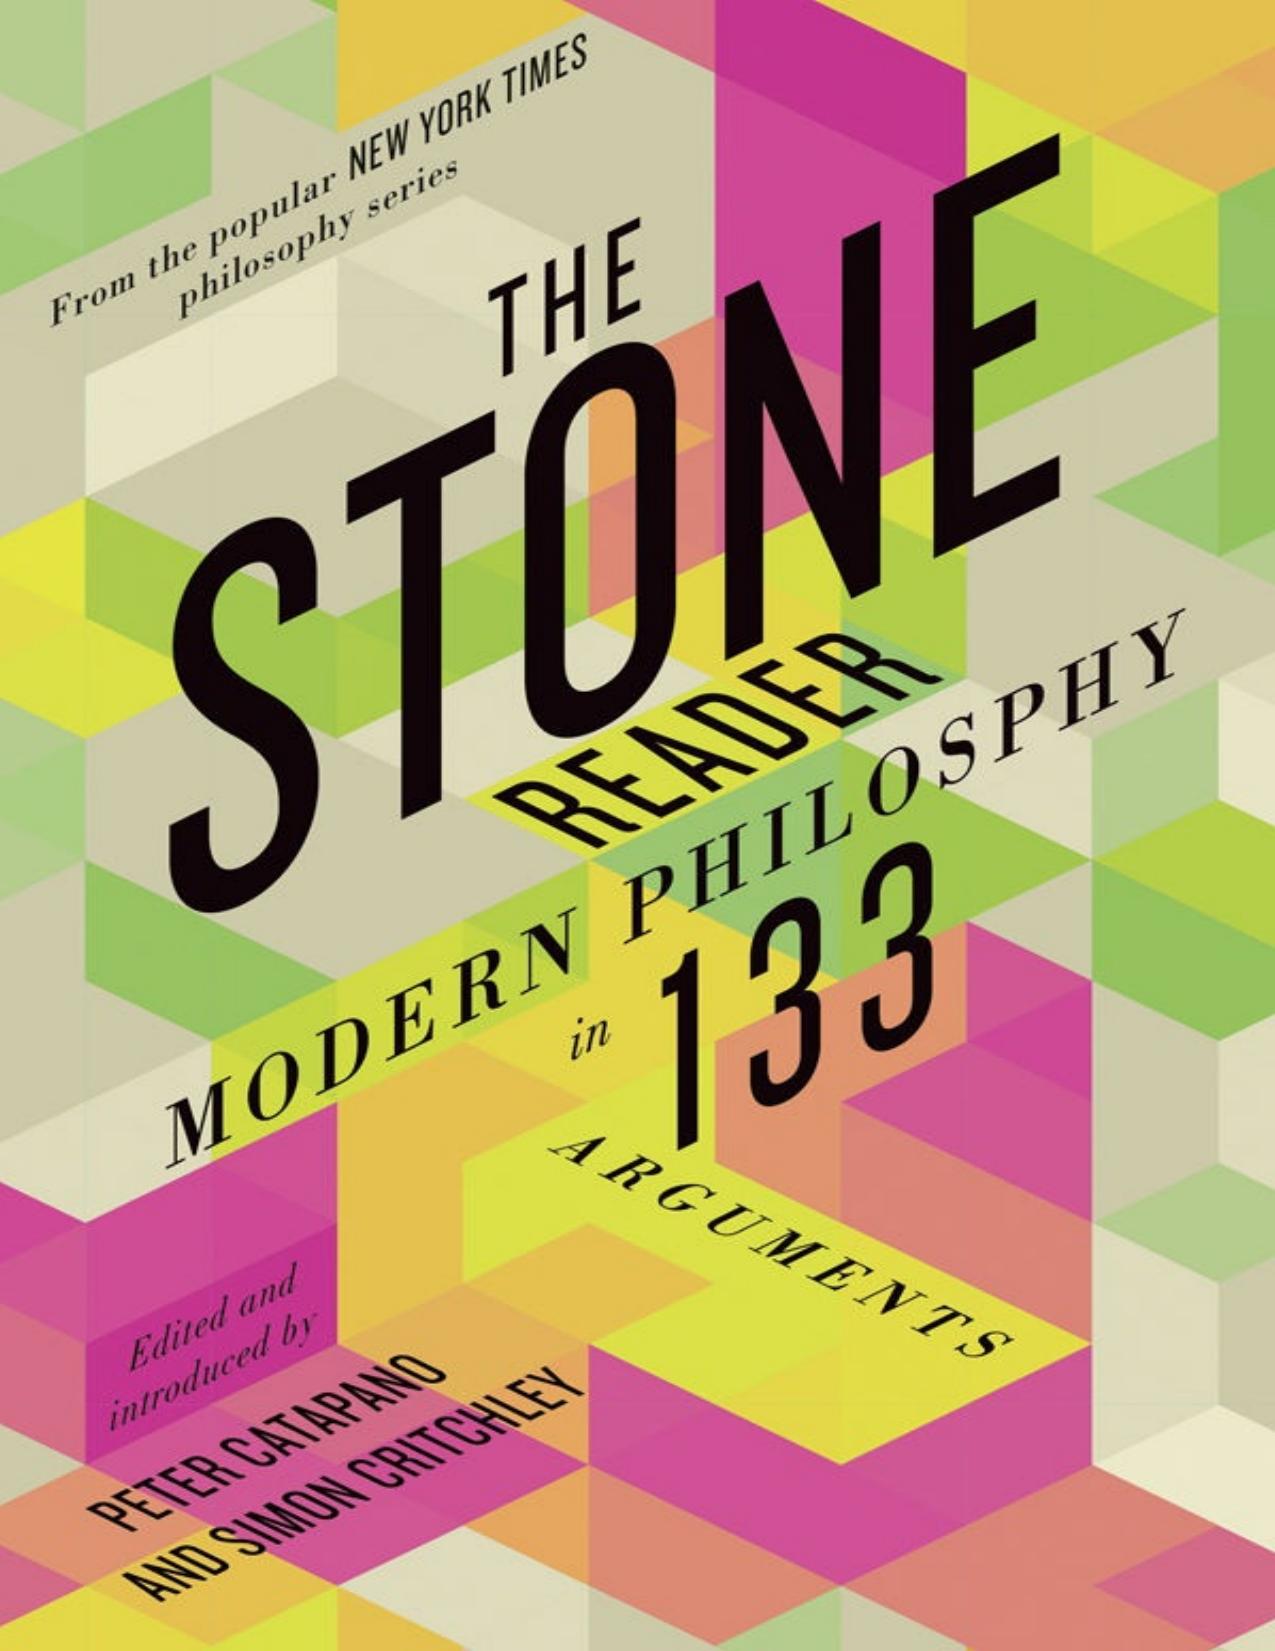 The Stone Reader: Modern Philosophy in 133 Arguments